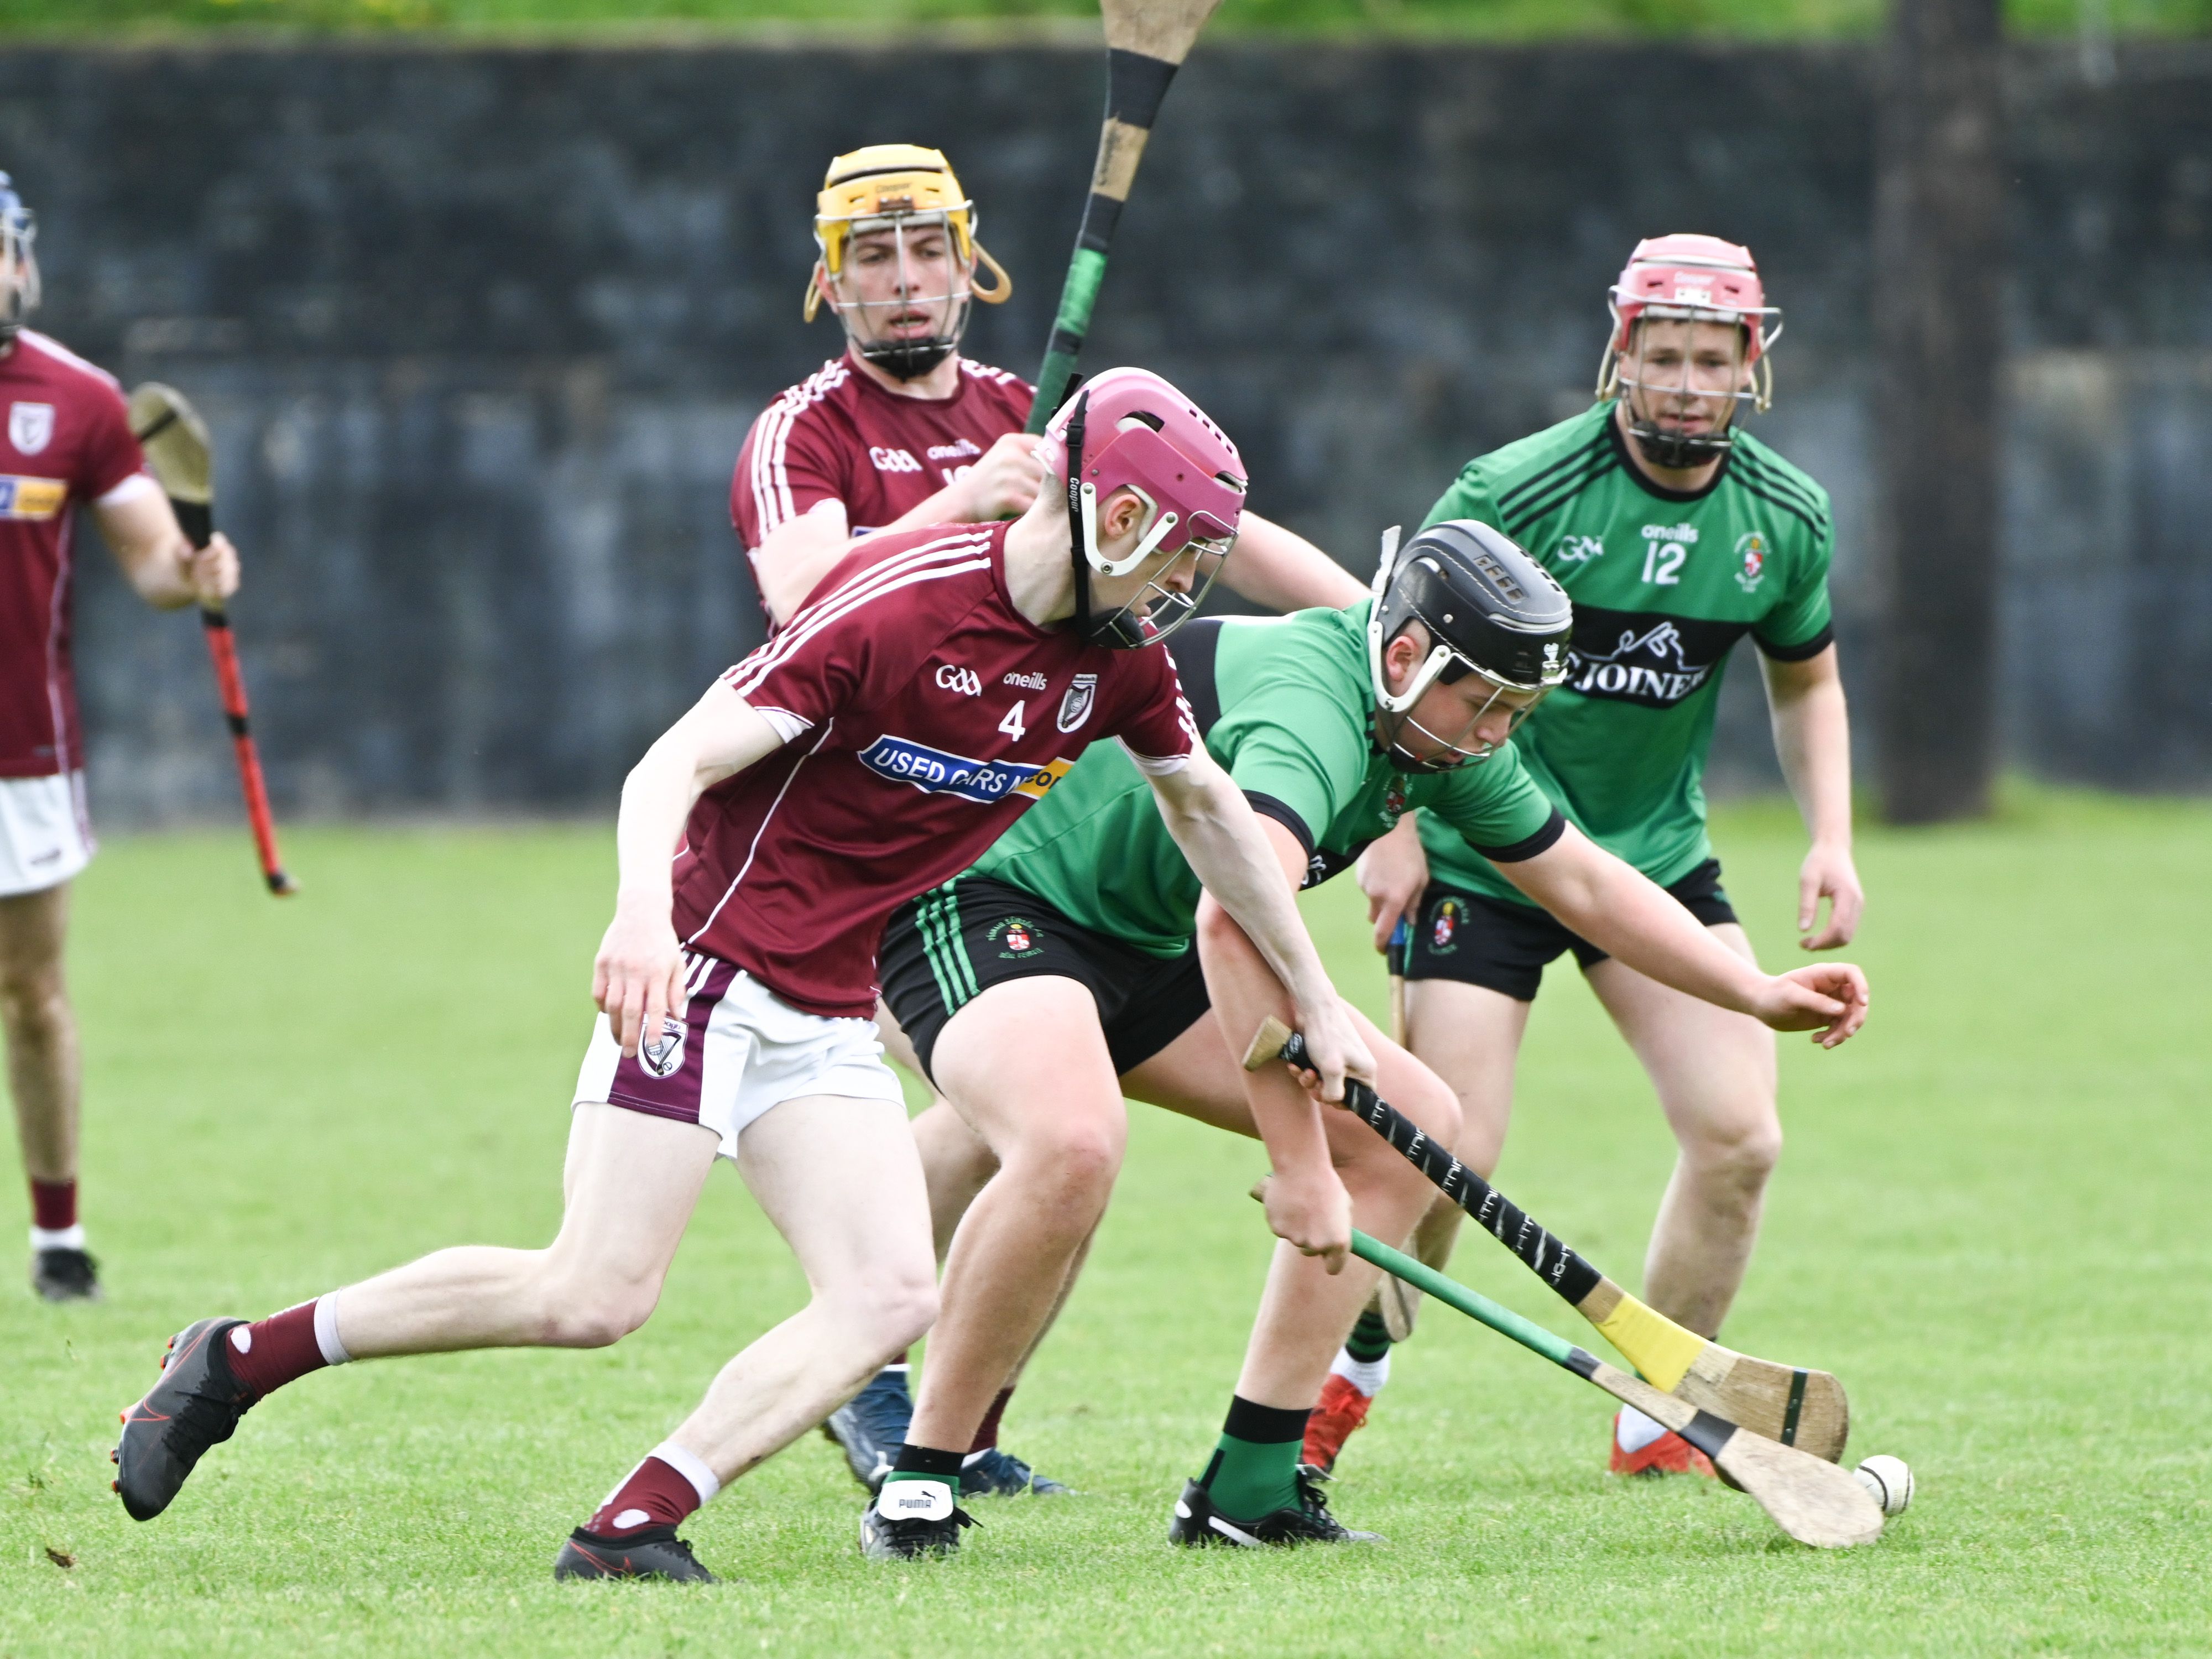 Bredagh overcame Sasfield\'s last Sunday, but the Paddies bounced back with a win over St Paul\'s in midweek and both clubs are in cross-county games on Sunday 